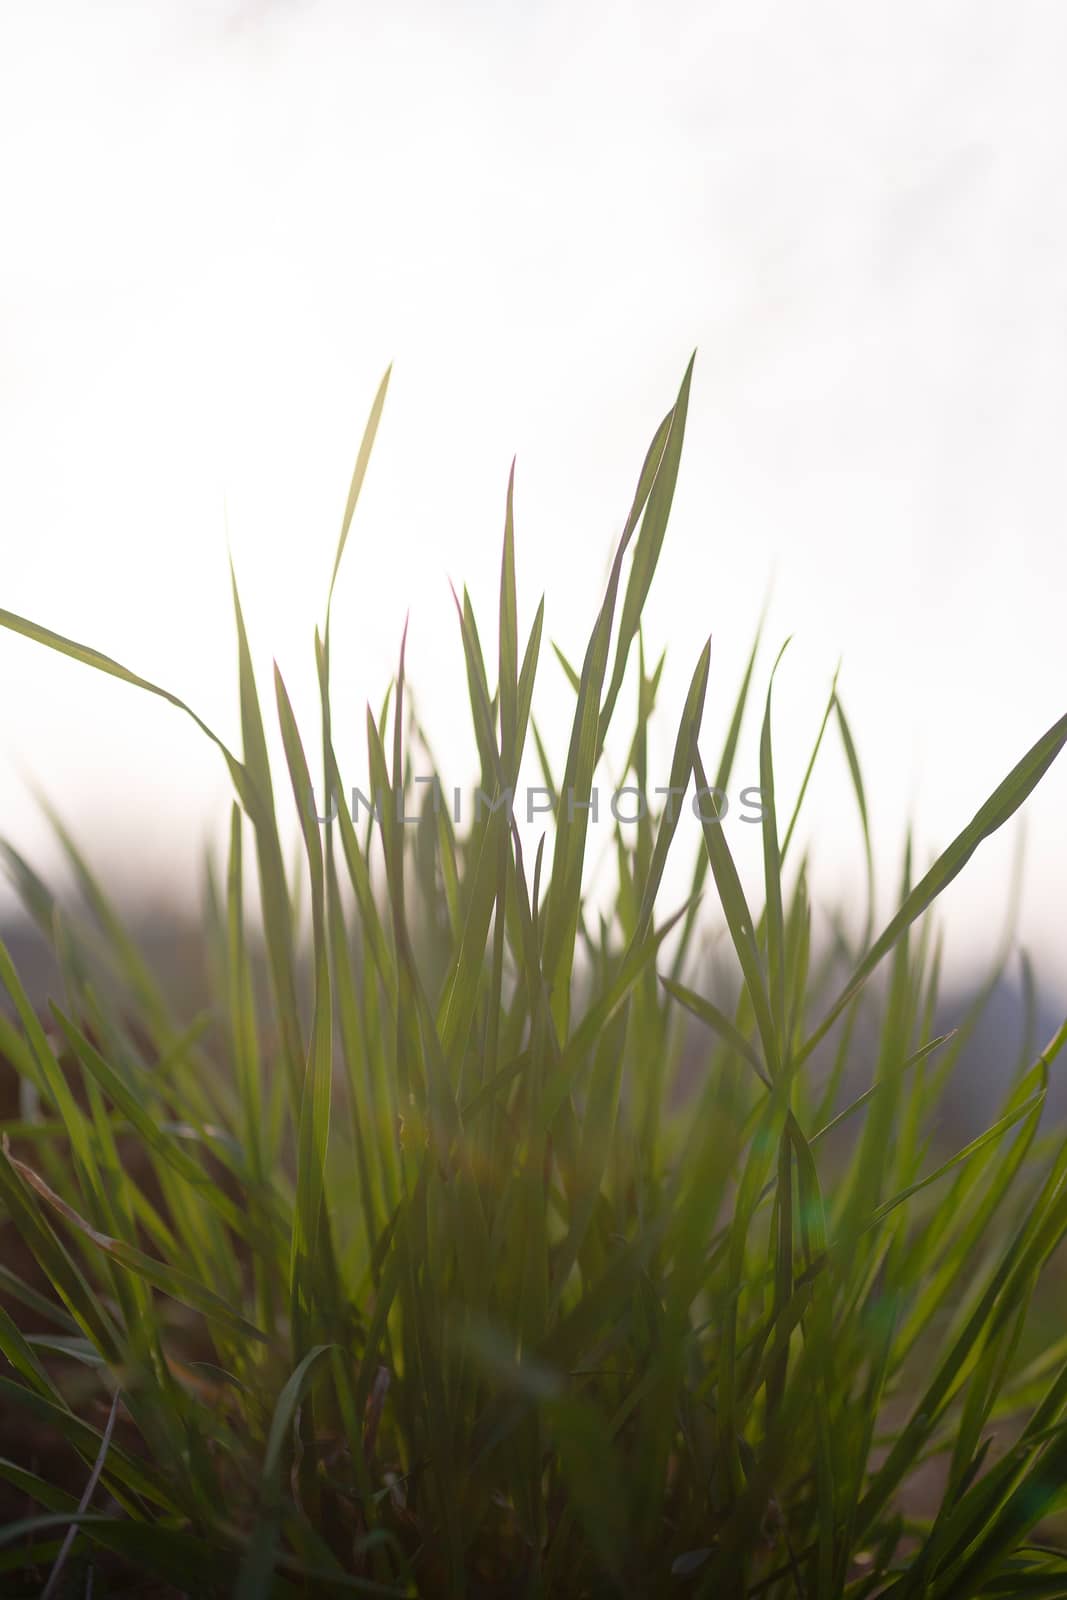 A grass opposite the sun on blurred background